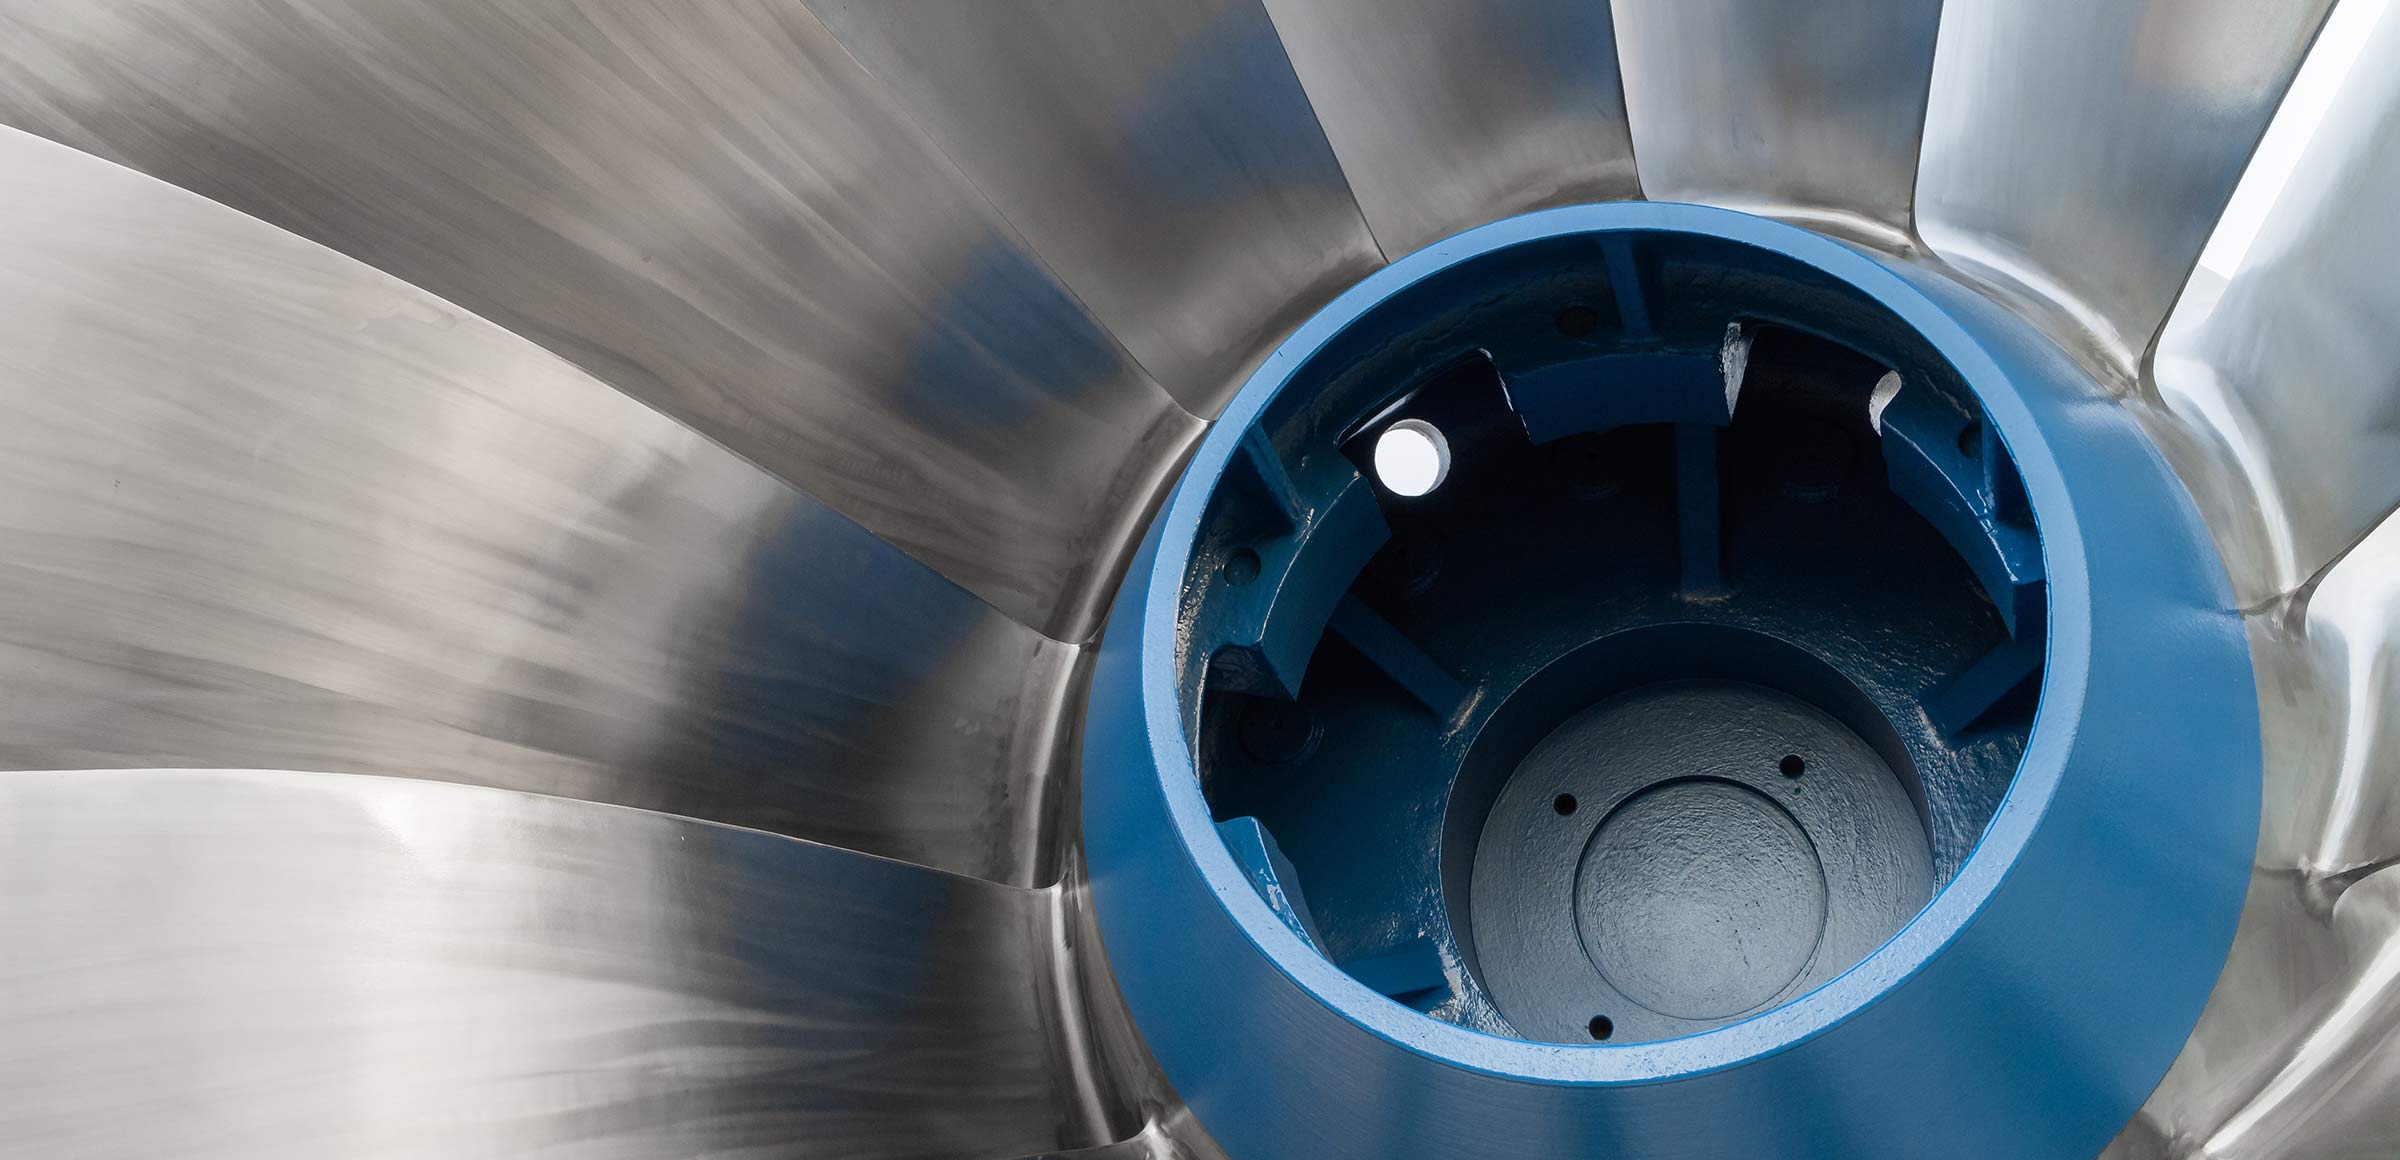 Large hydro turbines rely on segmented rings of carbon, phenolic, or elastomer materials, typically arranged in two, three, or four stages, to ensure effective sealing of the water pressure in the turbine below the head cover.